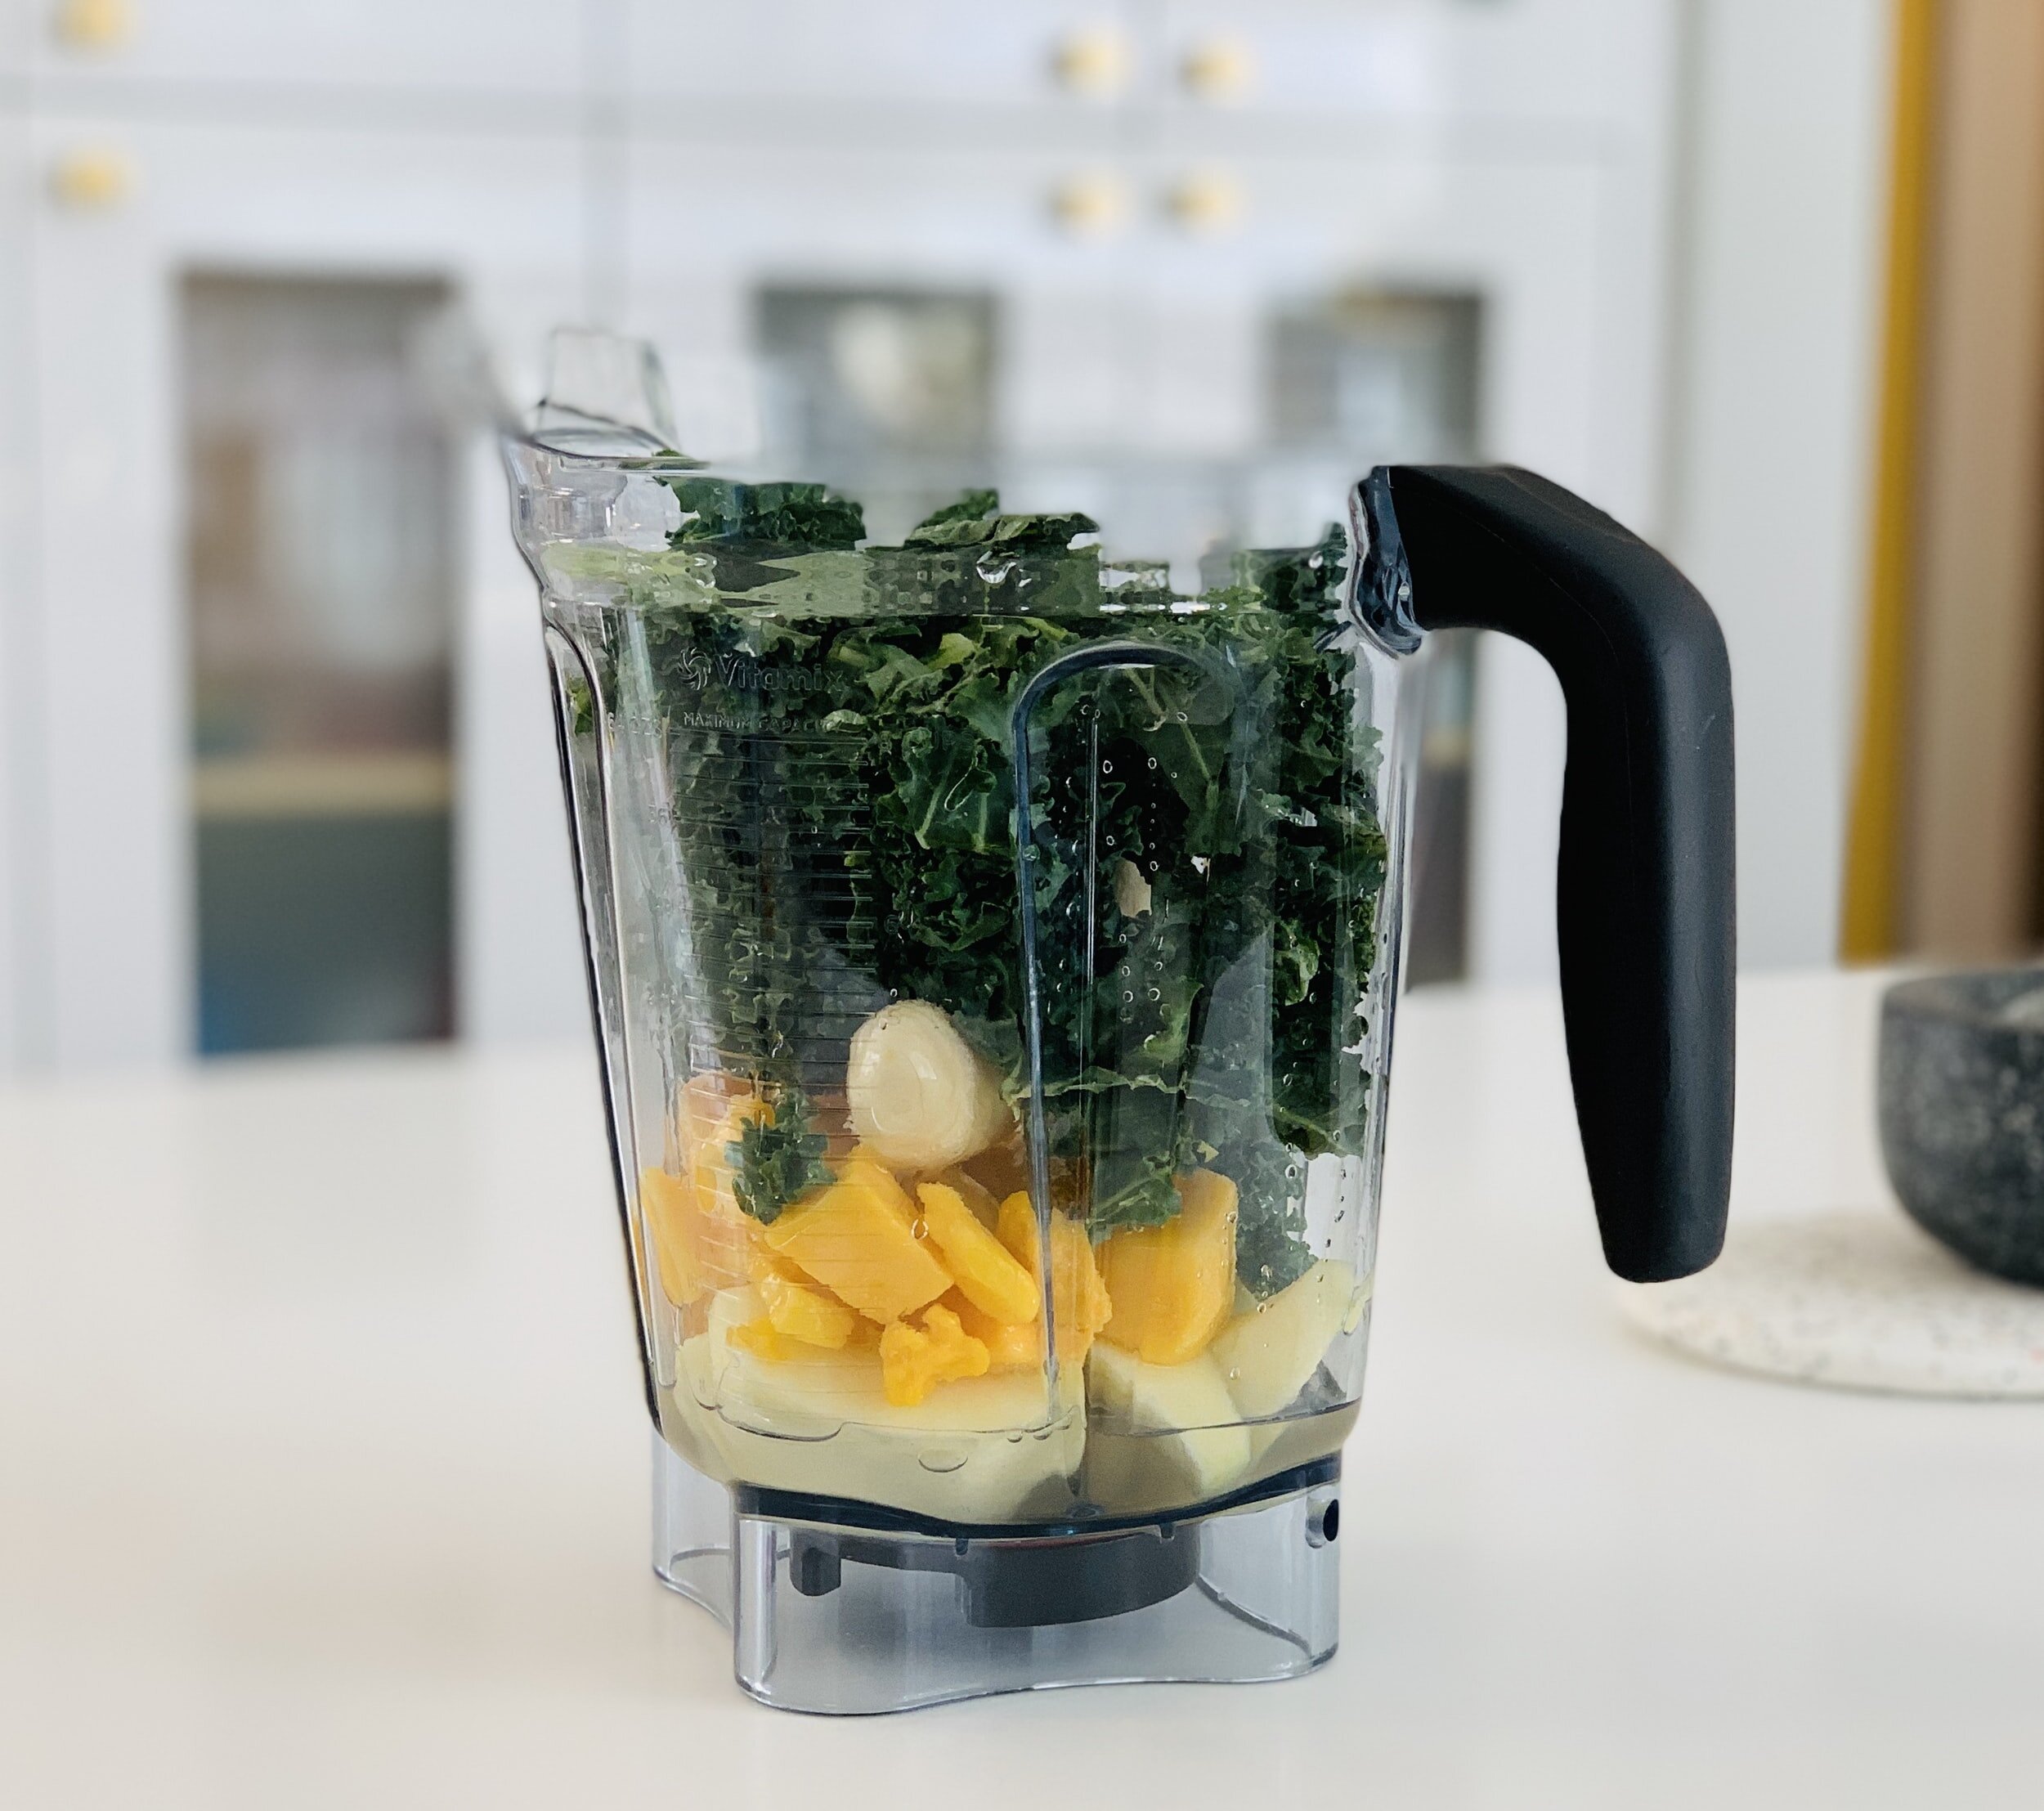 Facts about blenders, a kitchen staple – AHAM Consumer Blog